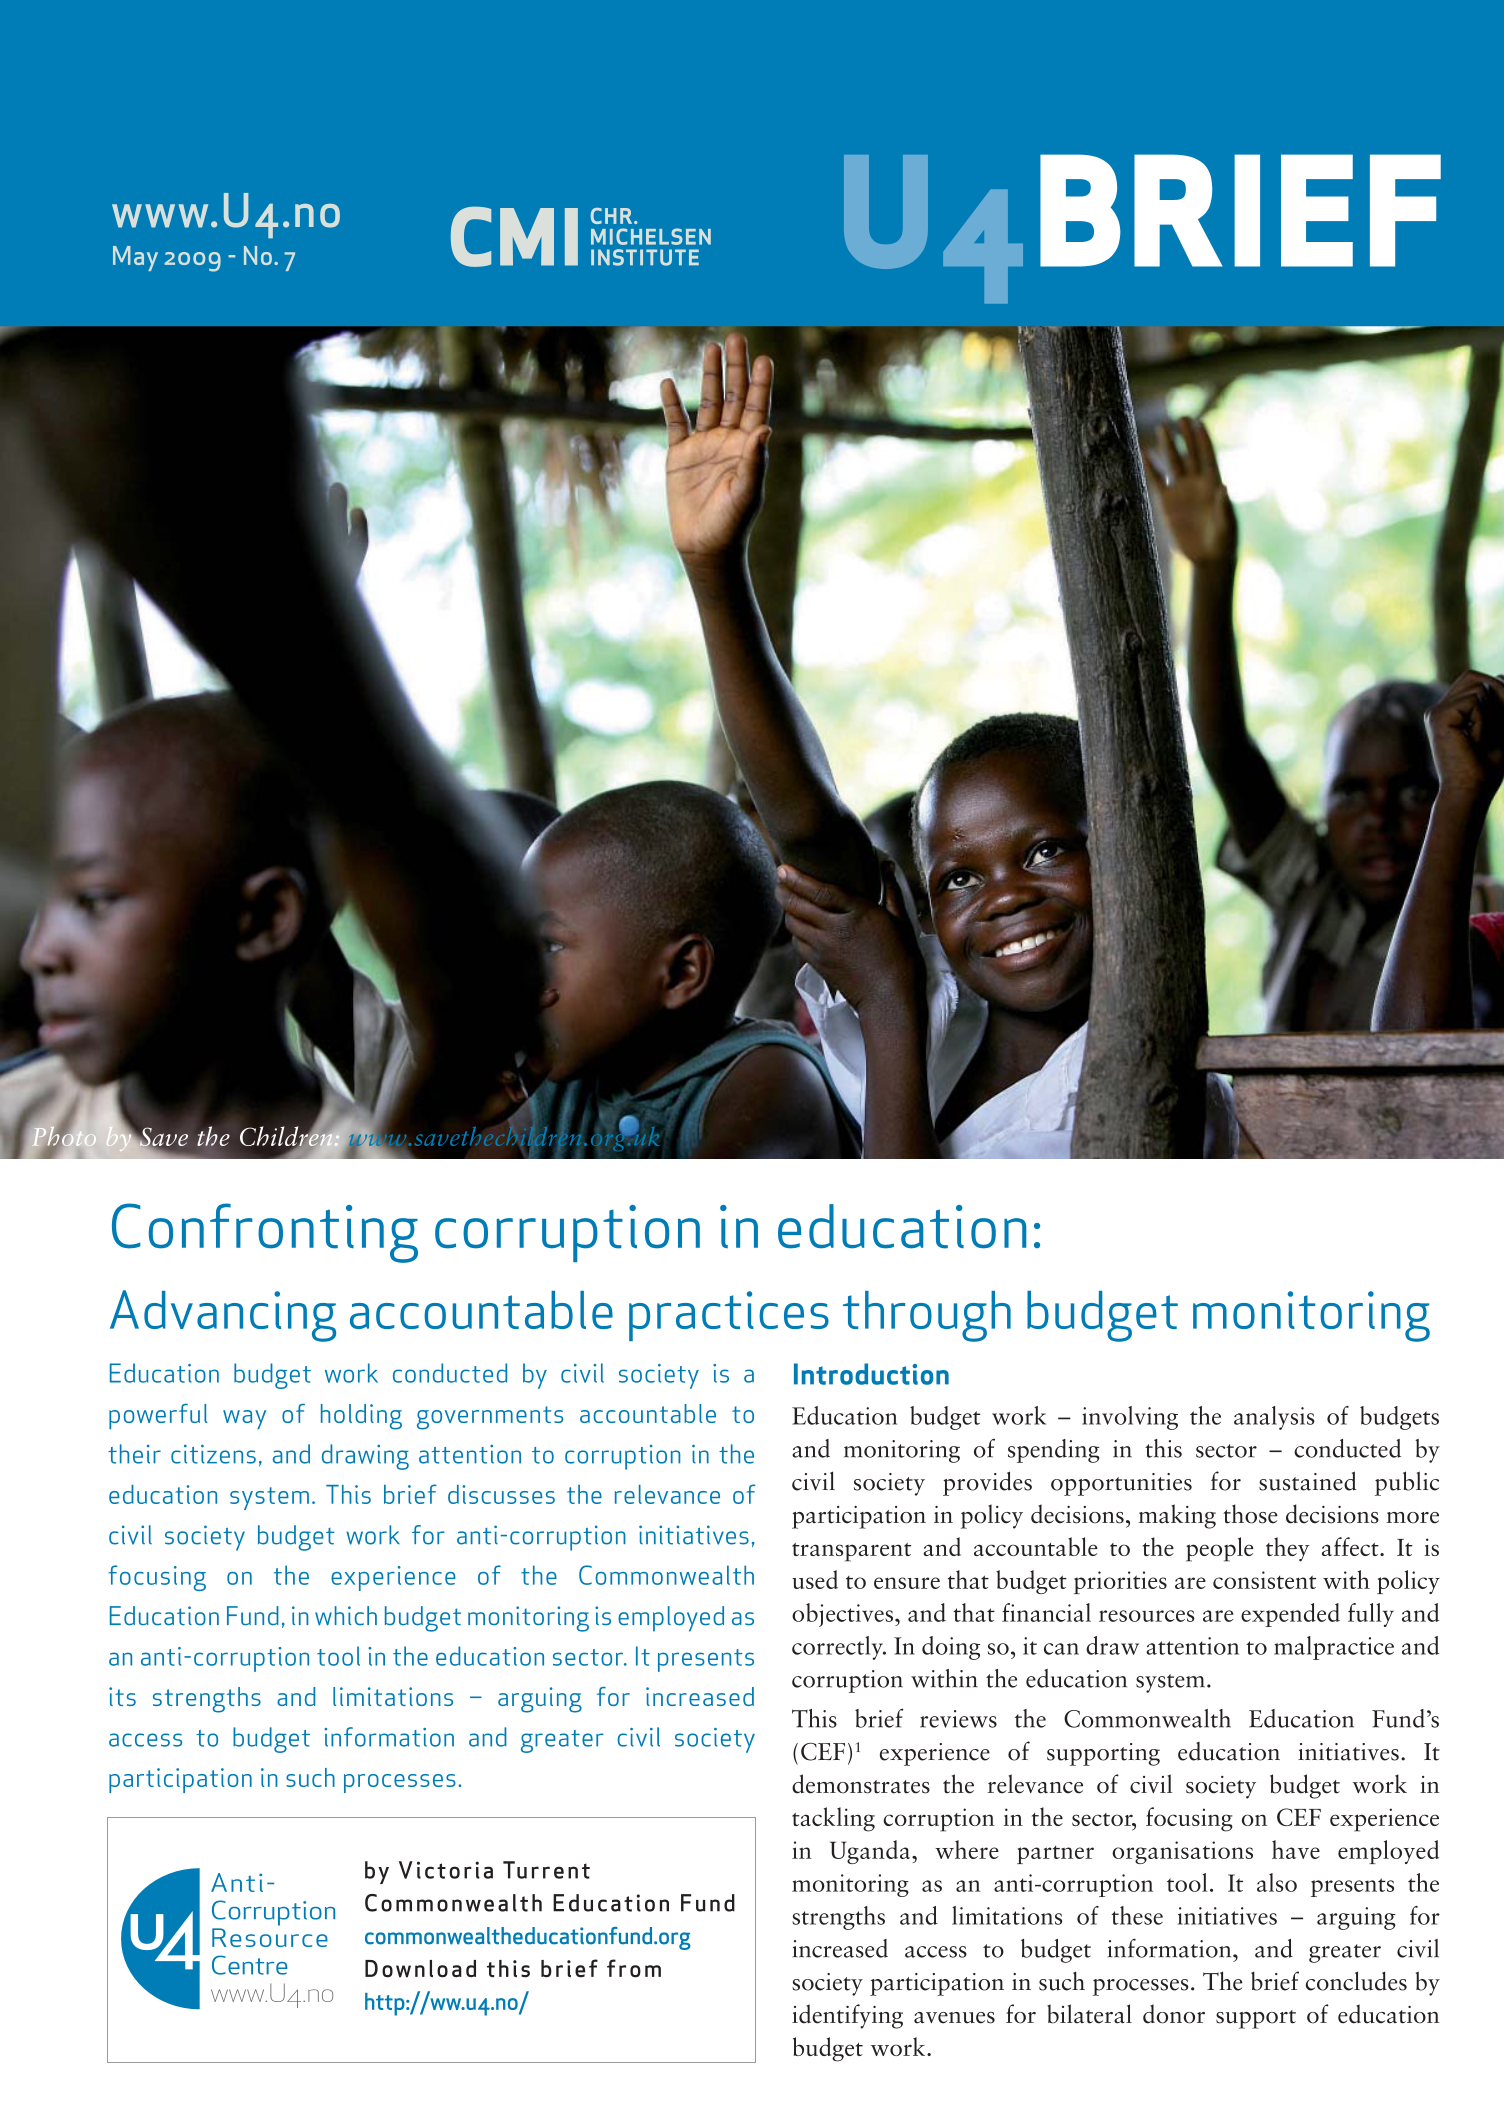 Confronting corruption in education: Advancing accountable practices through budget monitoring